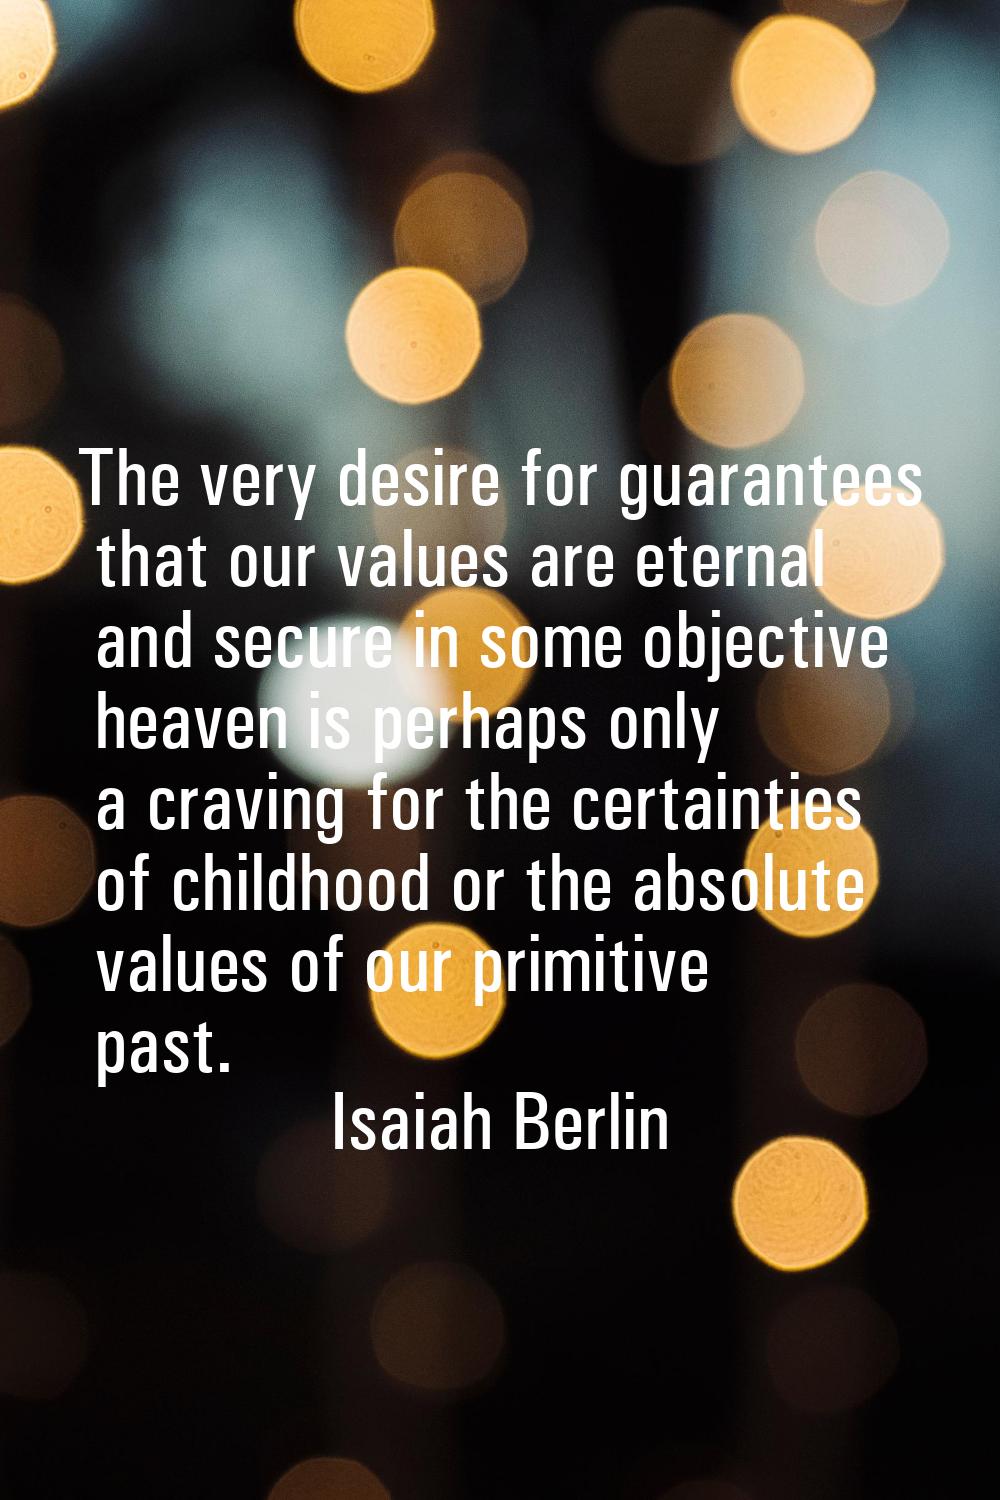 The very desire for guarantees that our values are eternal and secure in some objective heaven is p